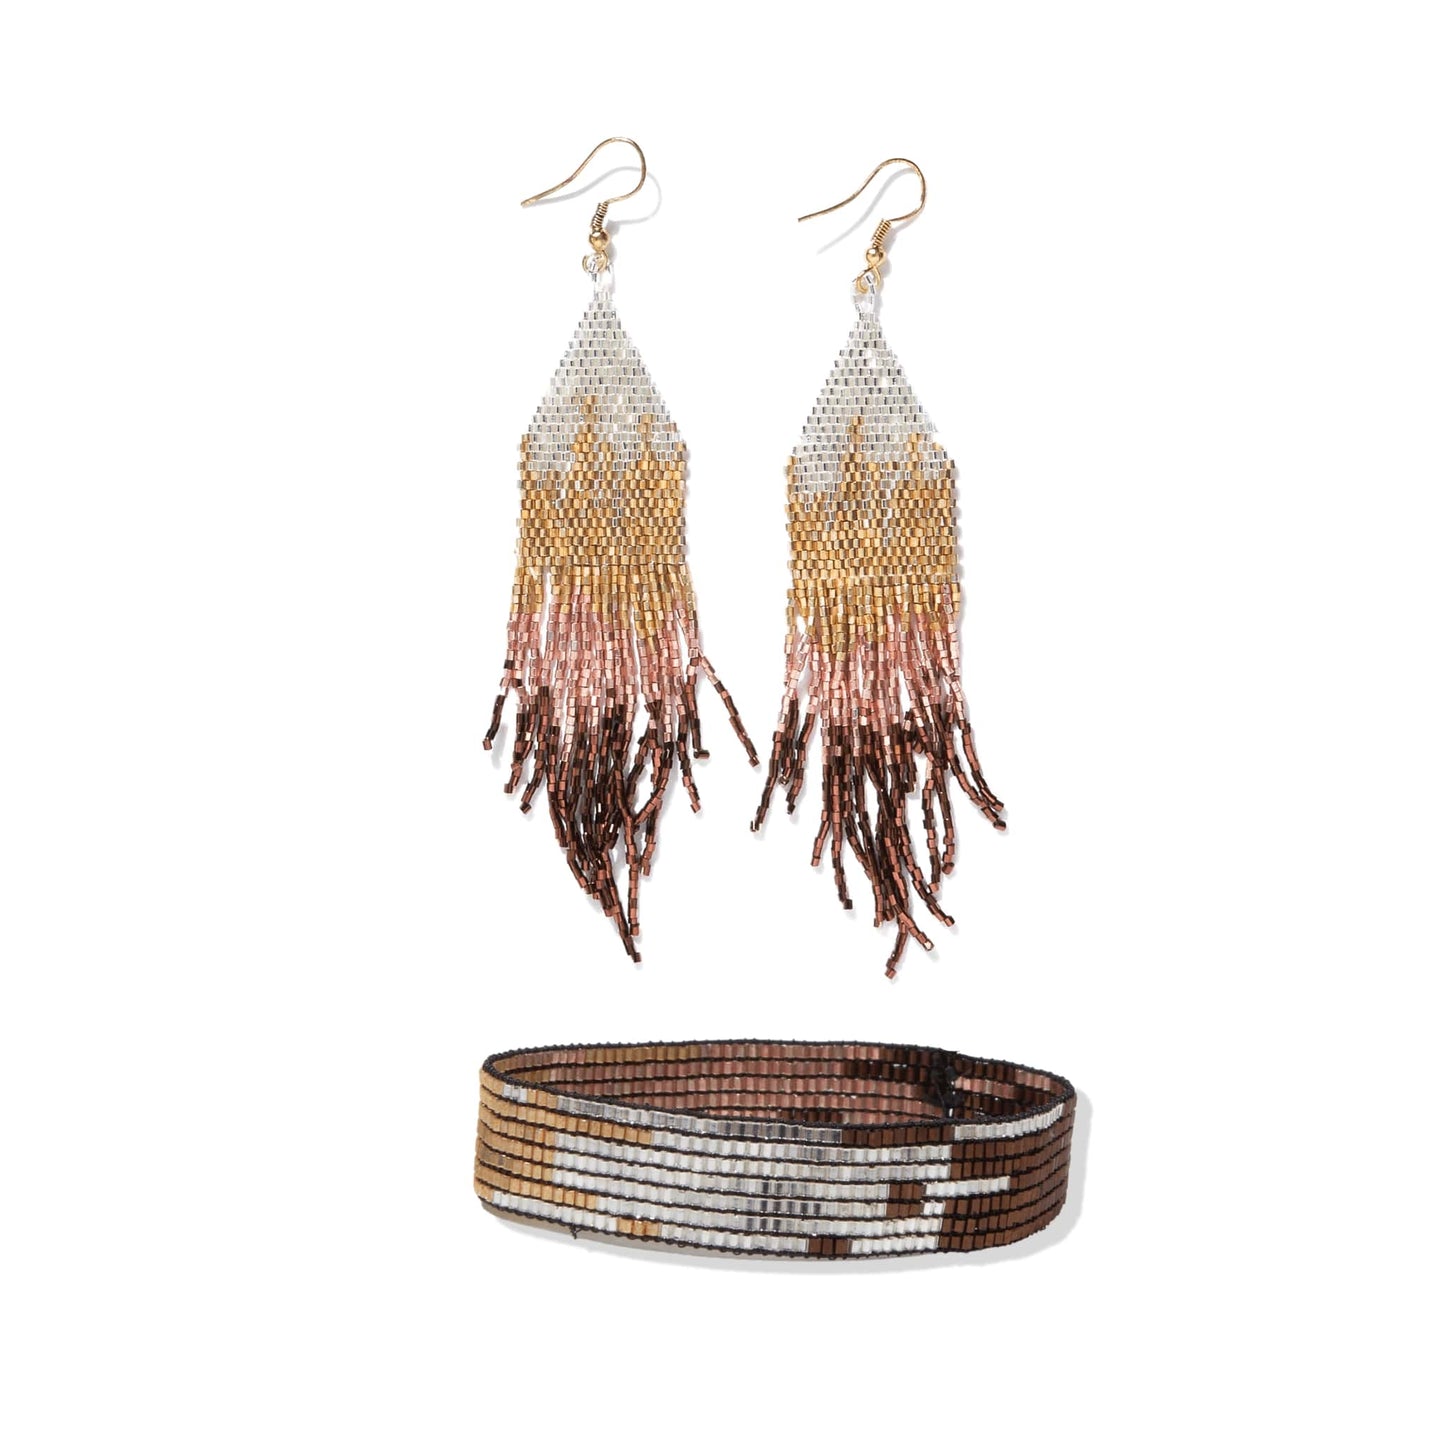 Claire + Alex ombre beaded earrings and bracelet set Mixed Metallic